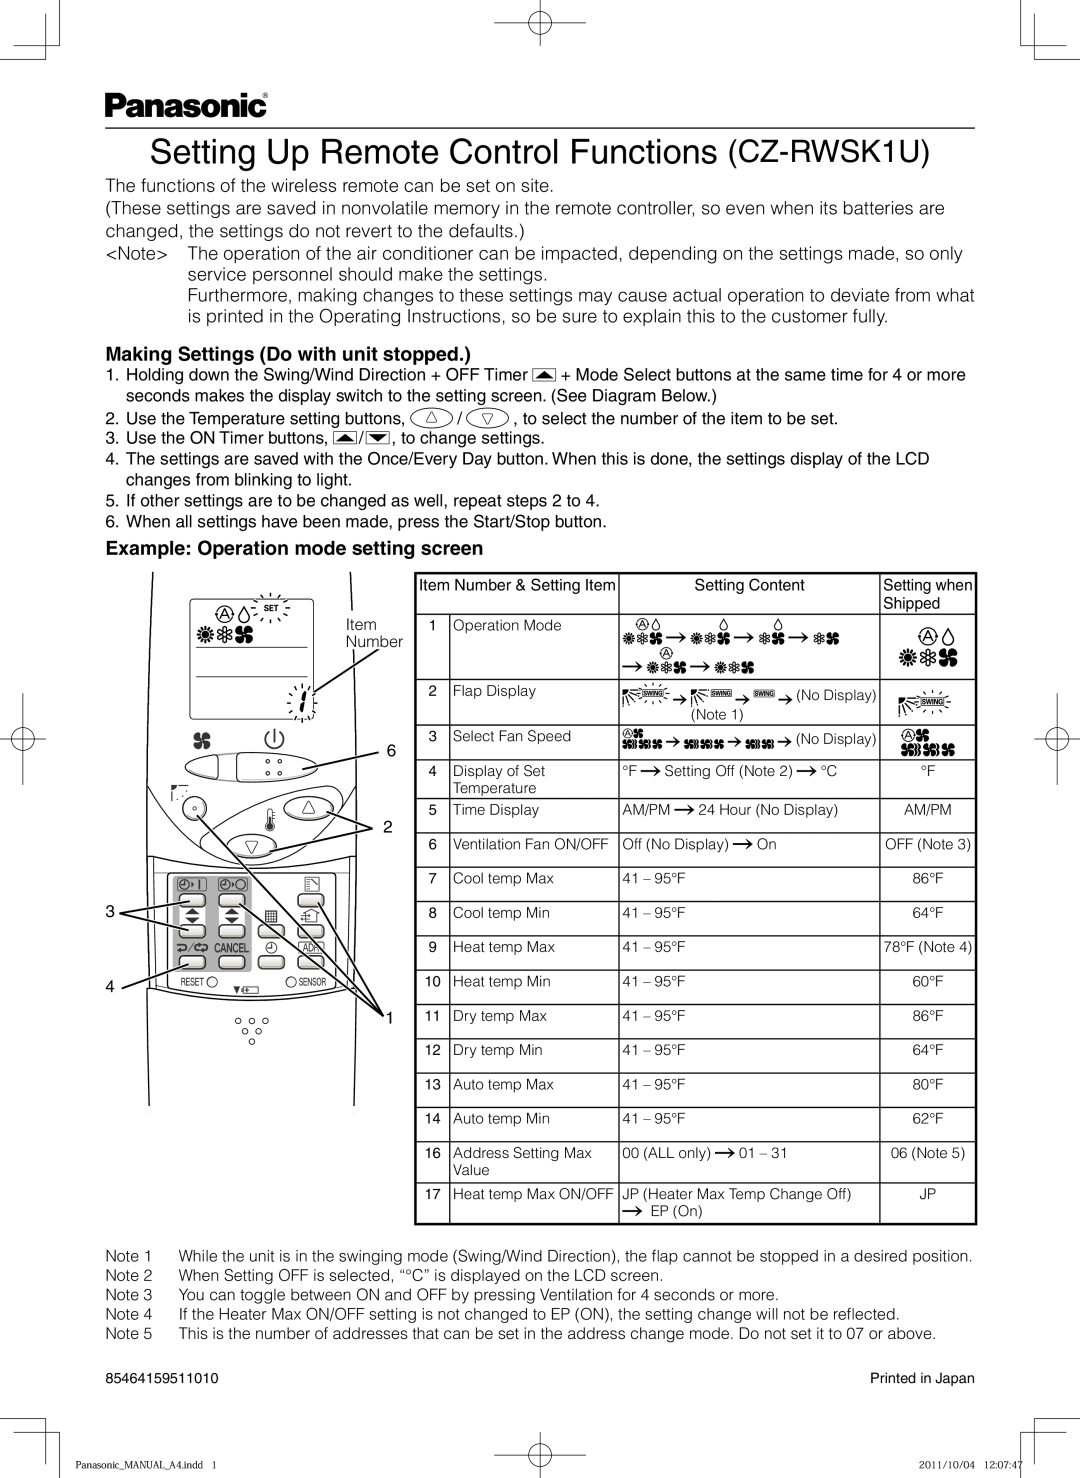 Panasonic manual Setting Up Remote Control Functions CZ-RWSK1U, Making Settings Do with unit stopped 